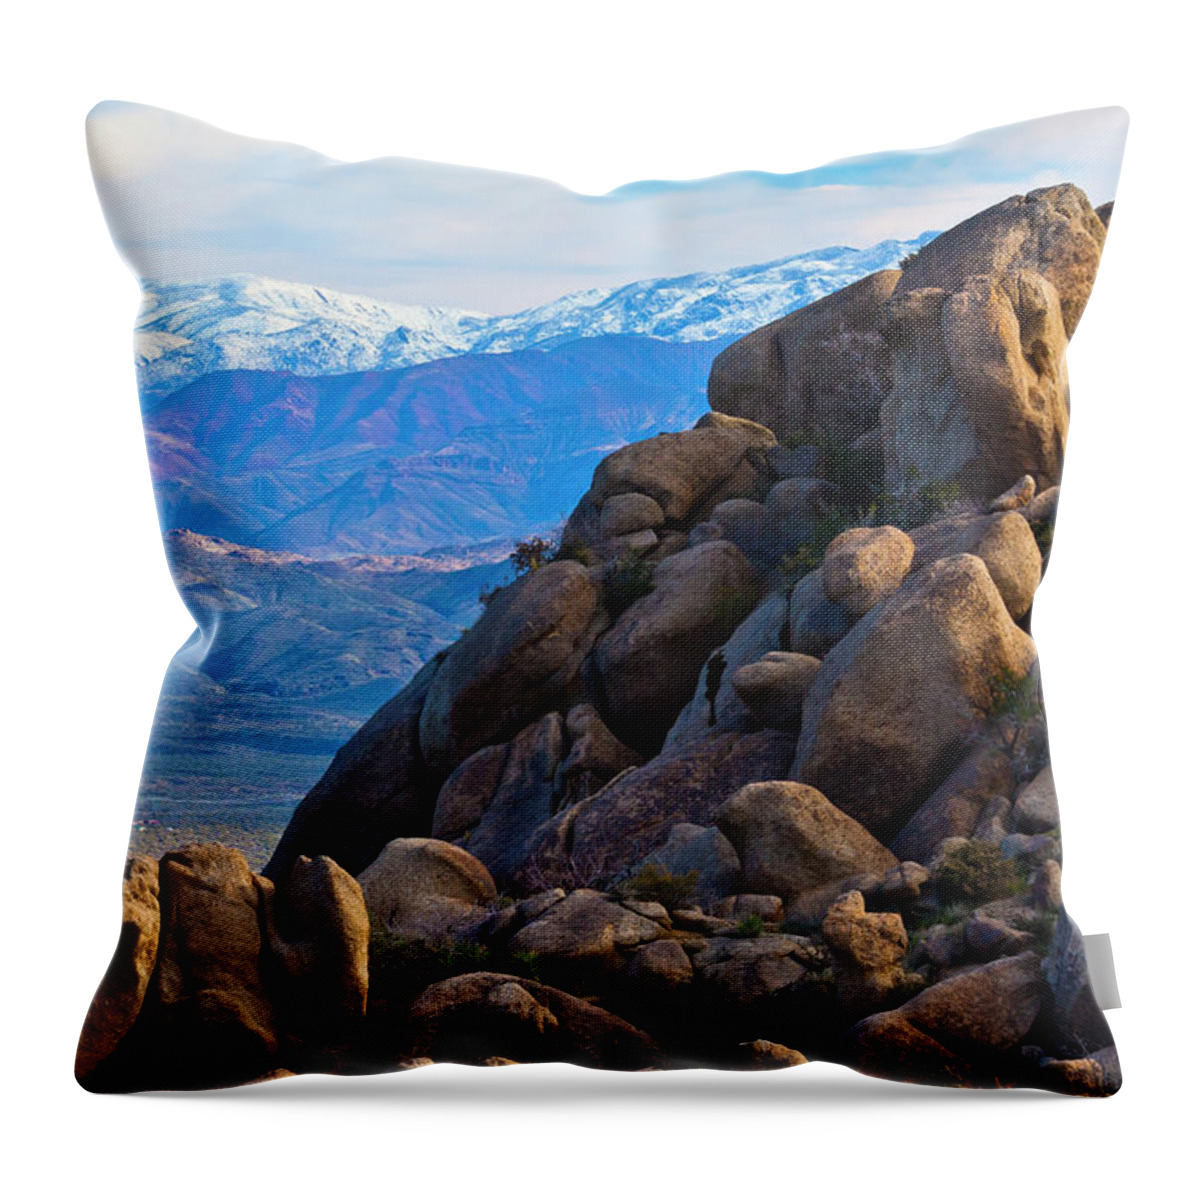 Tranquility Throw Pillow featuring the photograph Boulders And Mountains by Thomas Roche